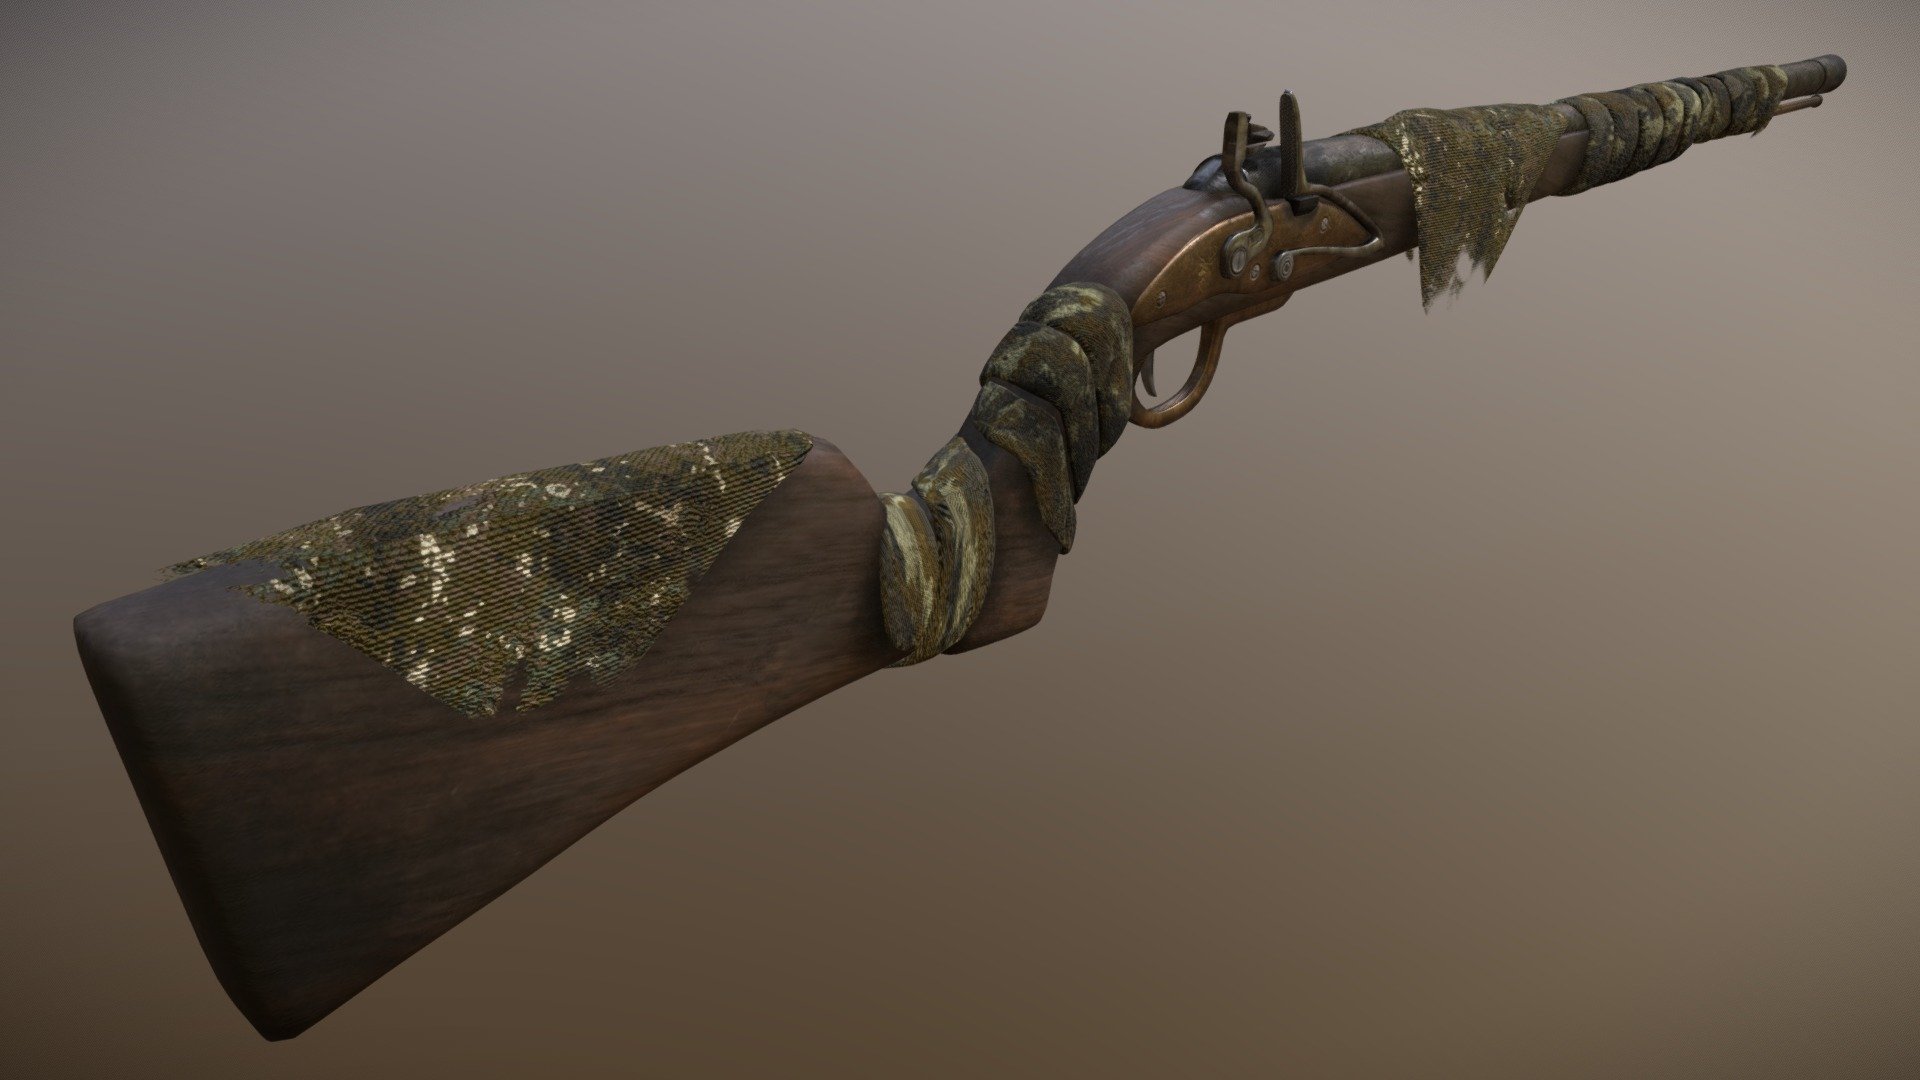 A traditional 16th century flintlock musket that has been modified to blend in with the forest.

Modeled in Maya, textured in Substance with 2k textures. (see engraving near firing mechanism)

No physics/cloth simulation used 3d model